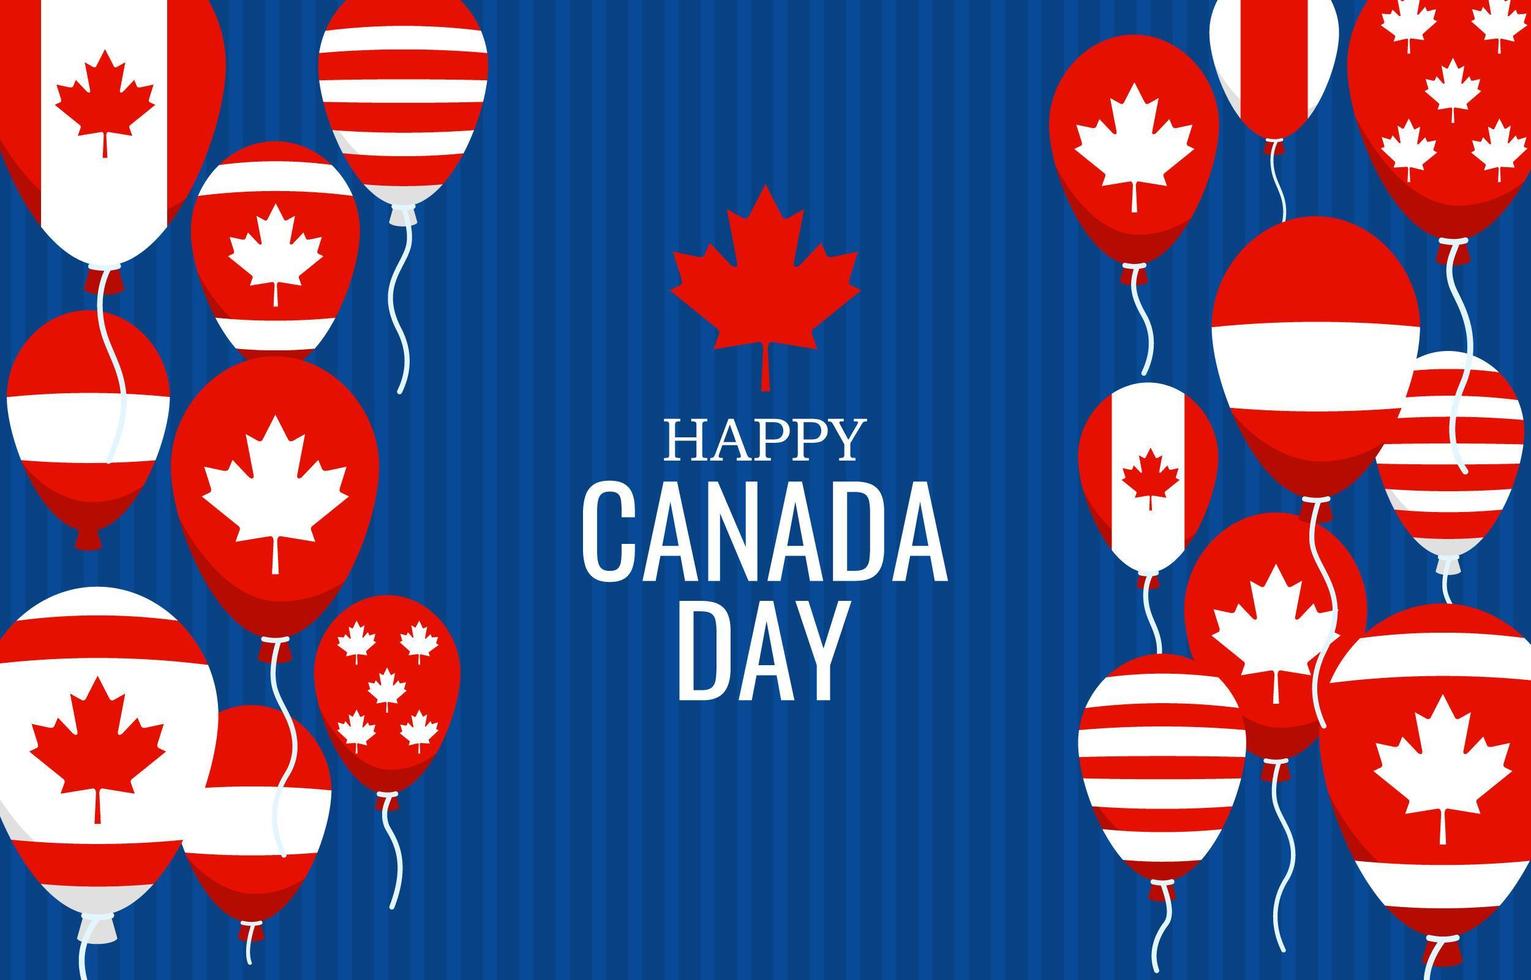 Happy Canada Day Greetings Background vector